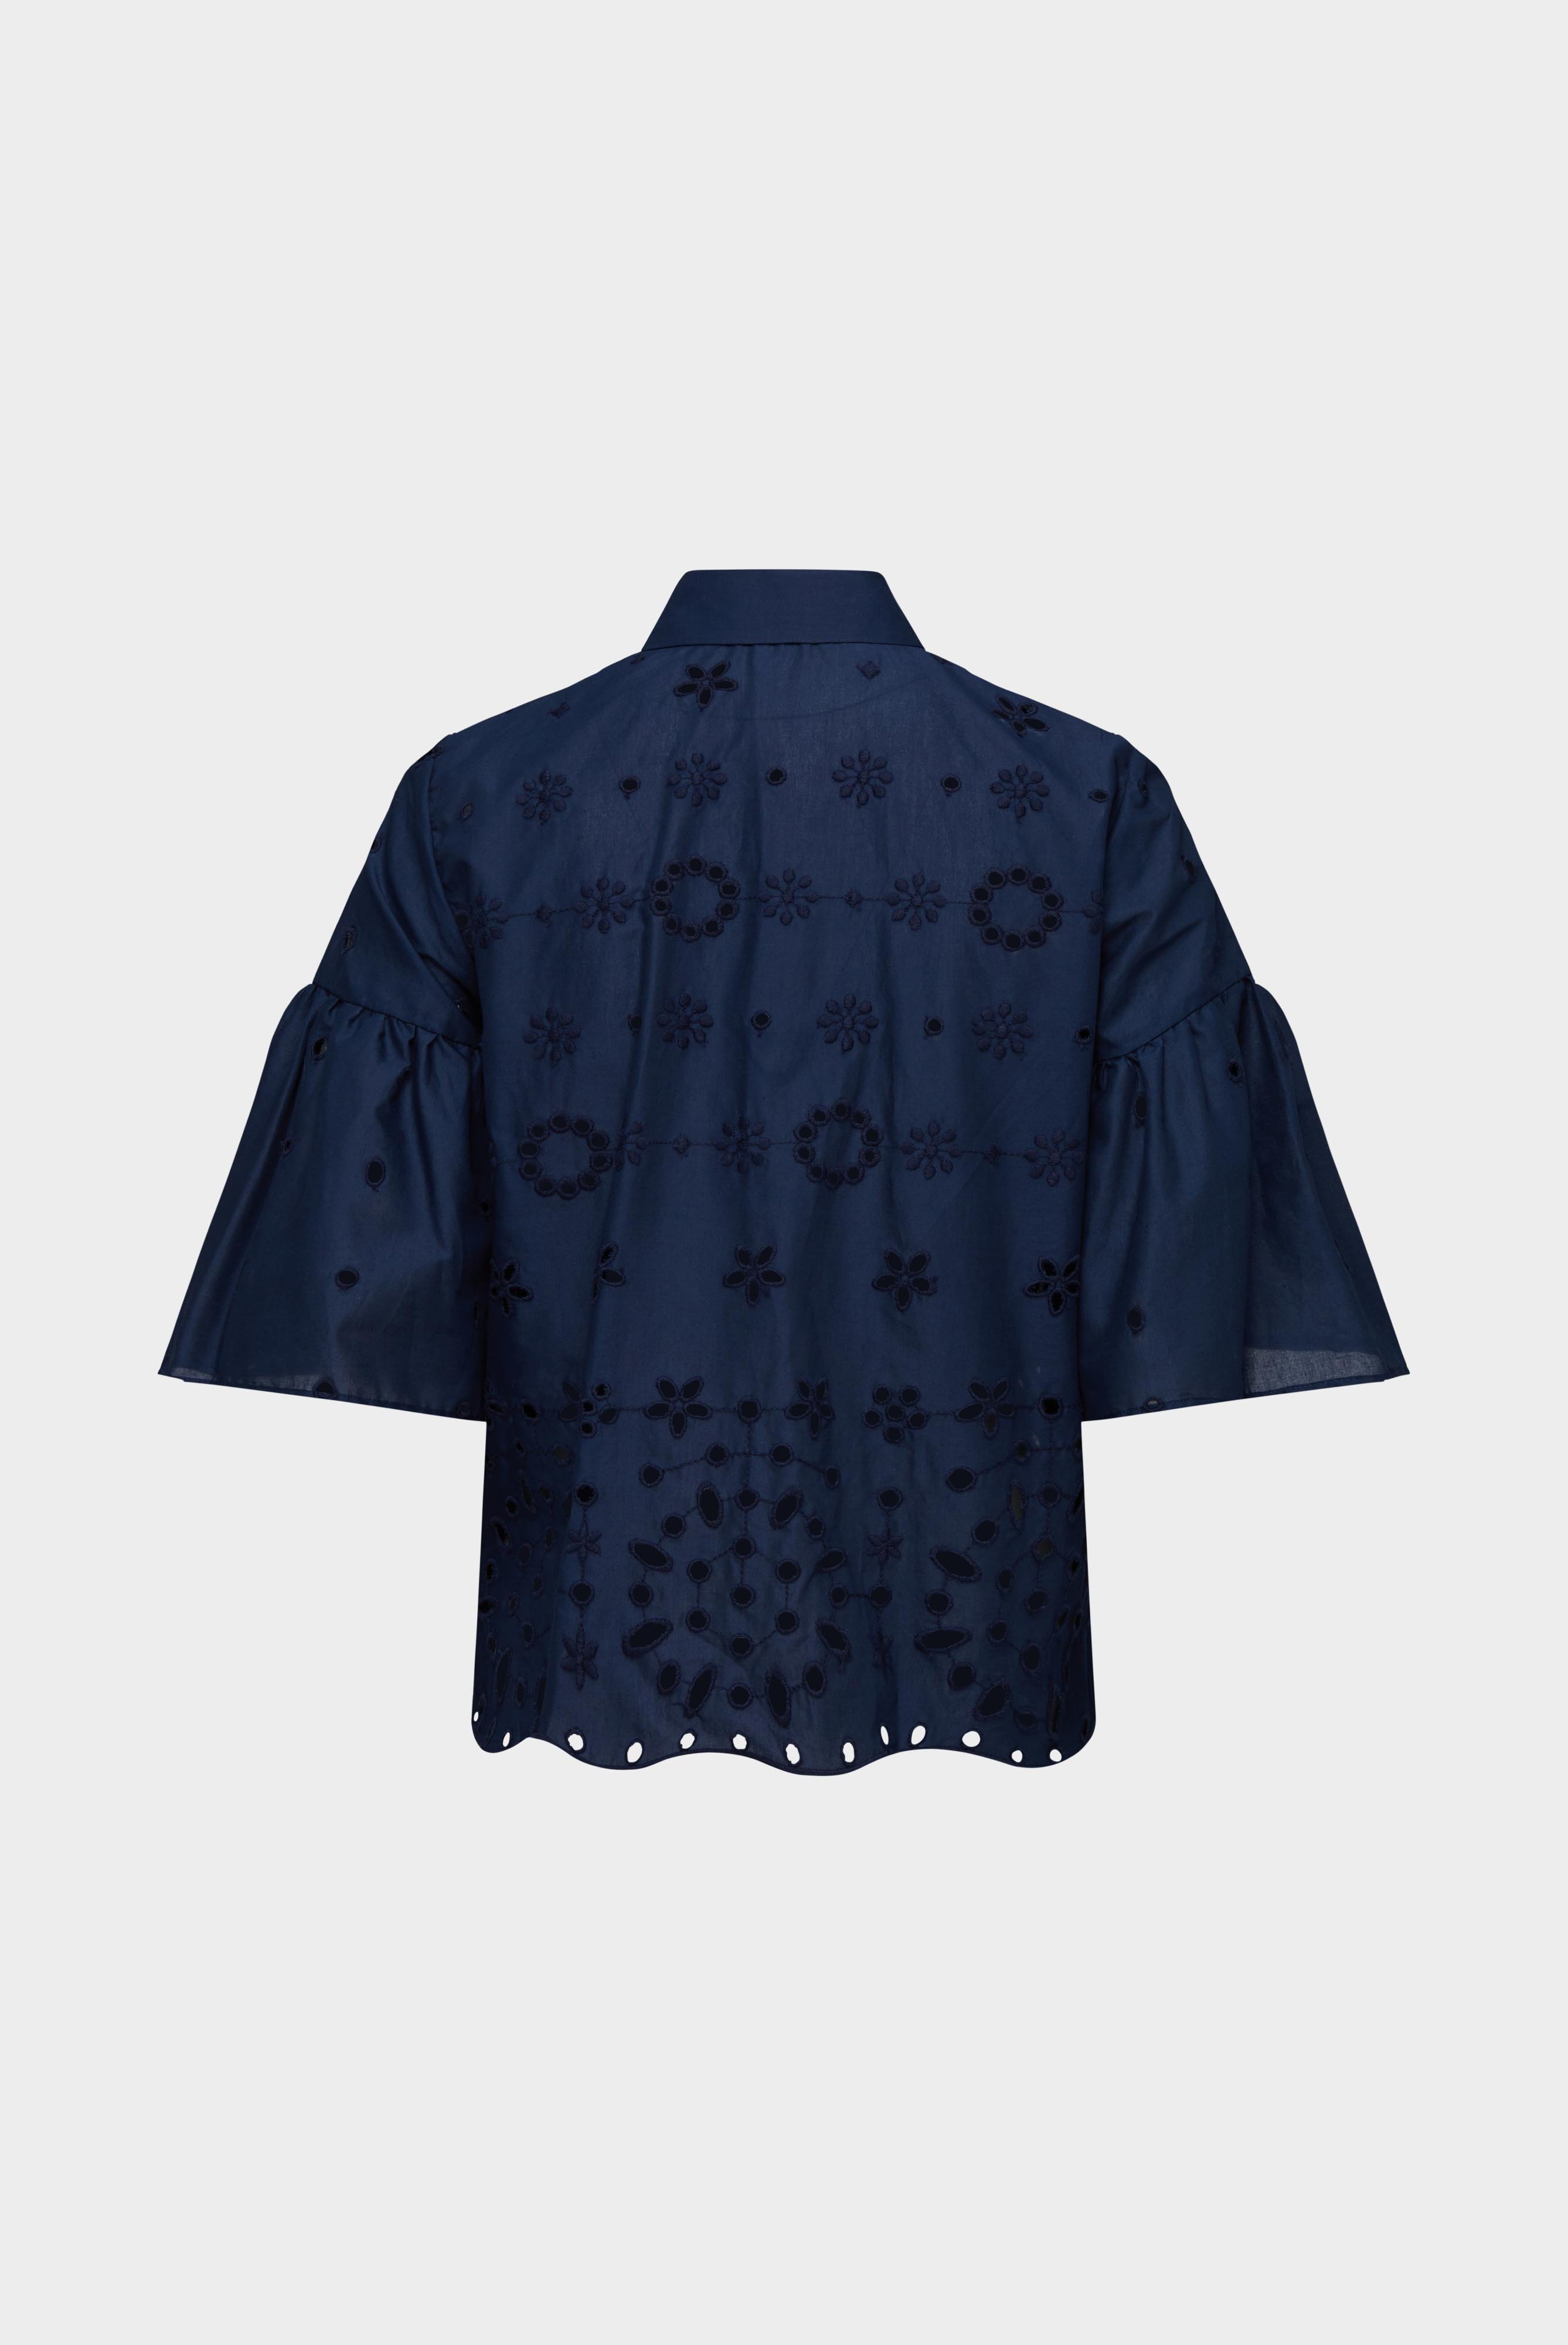 Casual Blouses+A-line blouse with ruffle details and embroidery made of blue cotton+05.525V.5X.150228.790.34